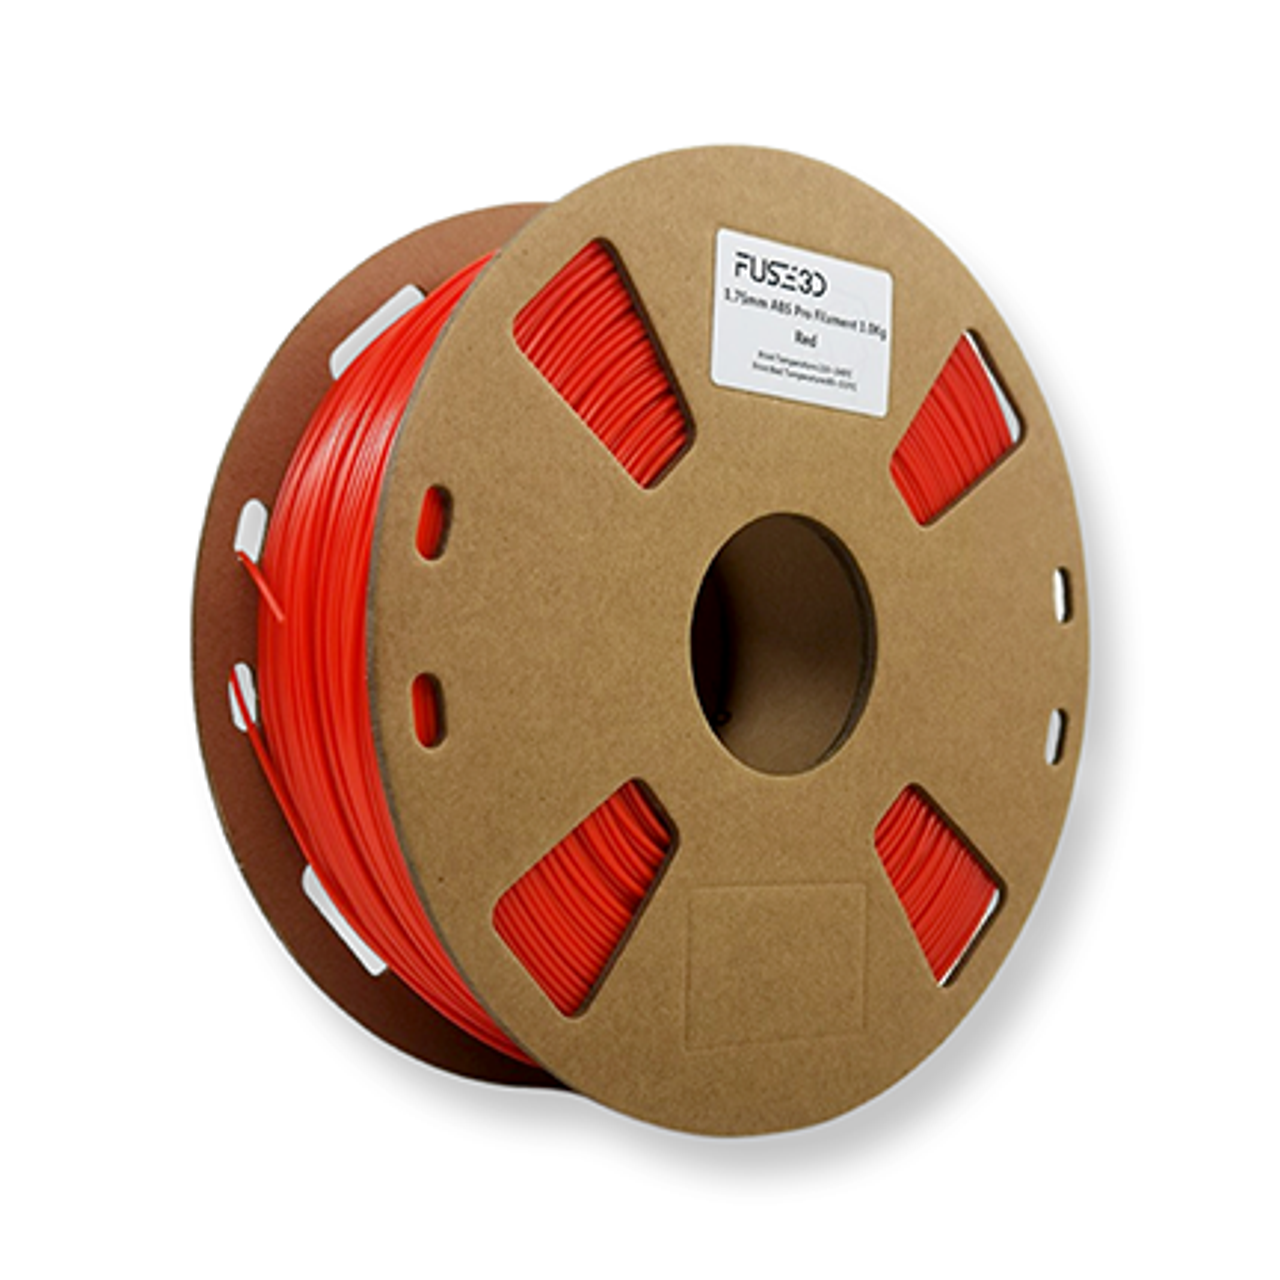 Fuse 3D ABS Pro Red 3D Printing Filament